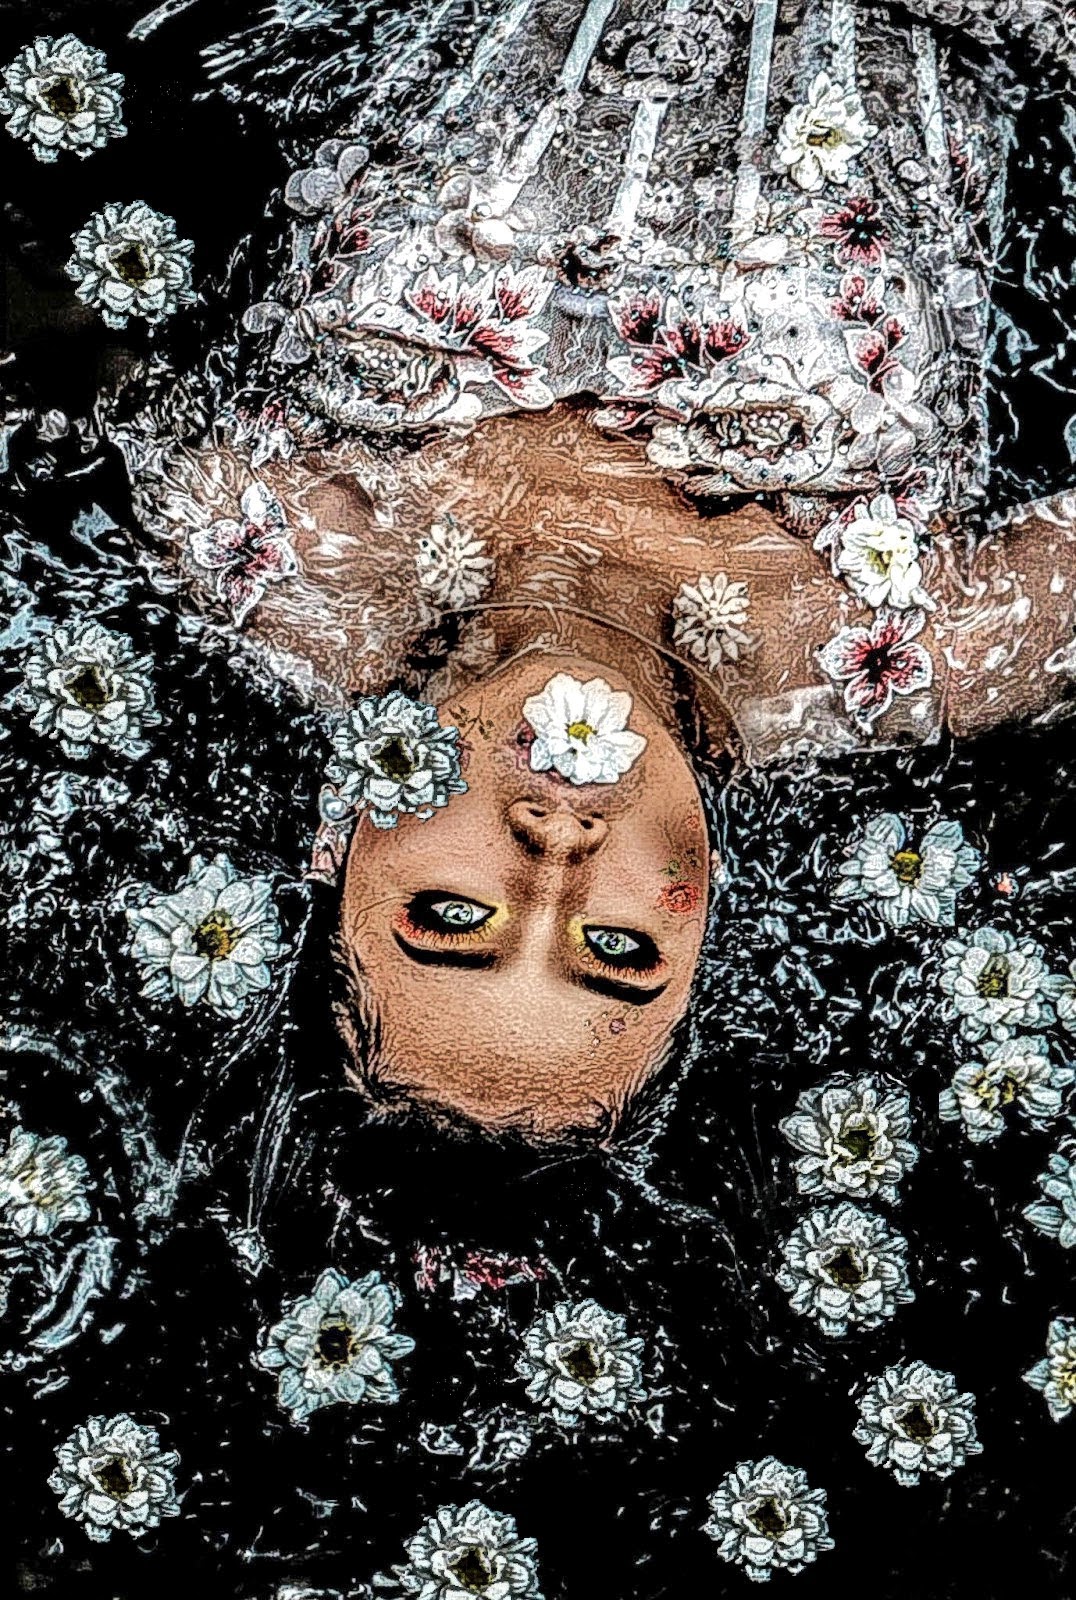 The art piece features a beautiful young coloured woman in a white dress covered in white flowers laying down on a black background with a few flower petals surrounding her.